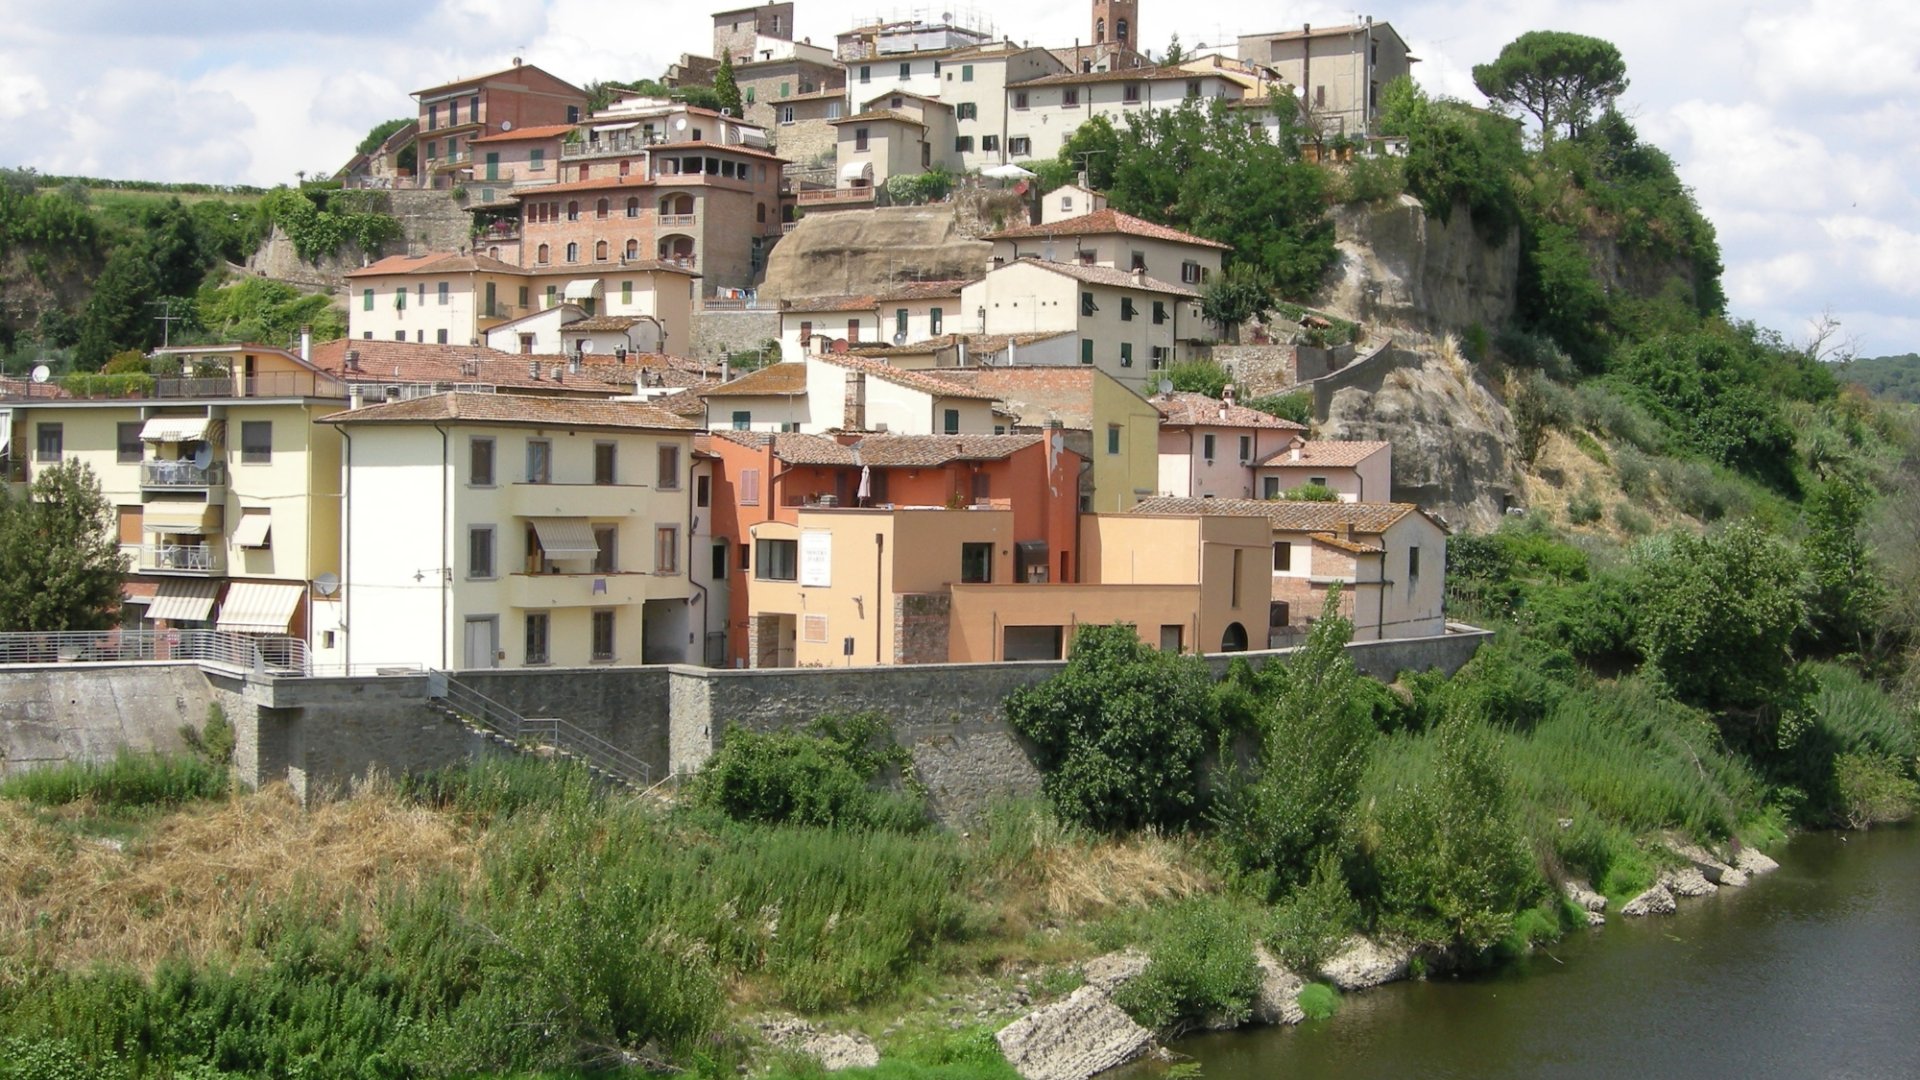 View of Capraia from the bridge over the Arno river